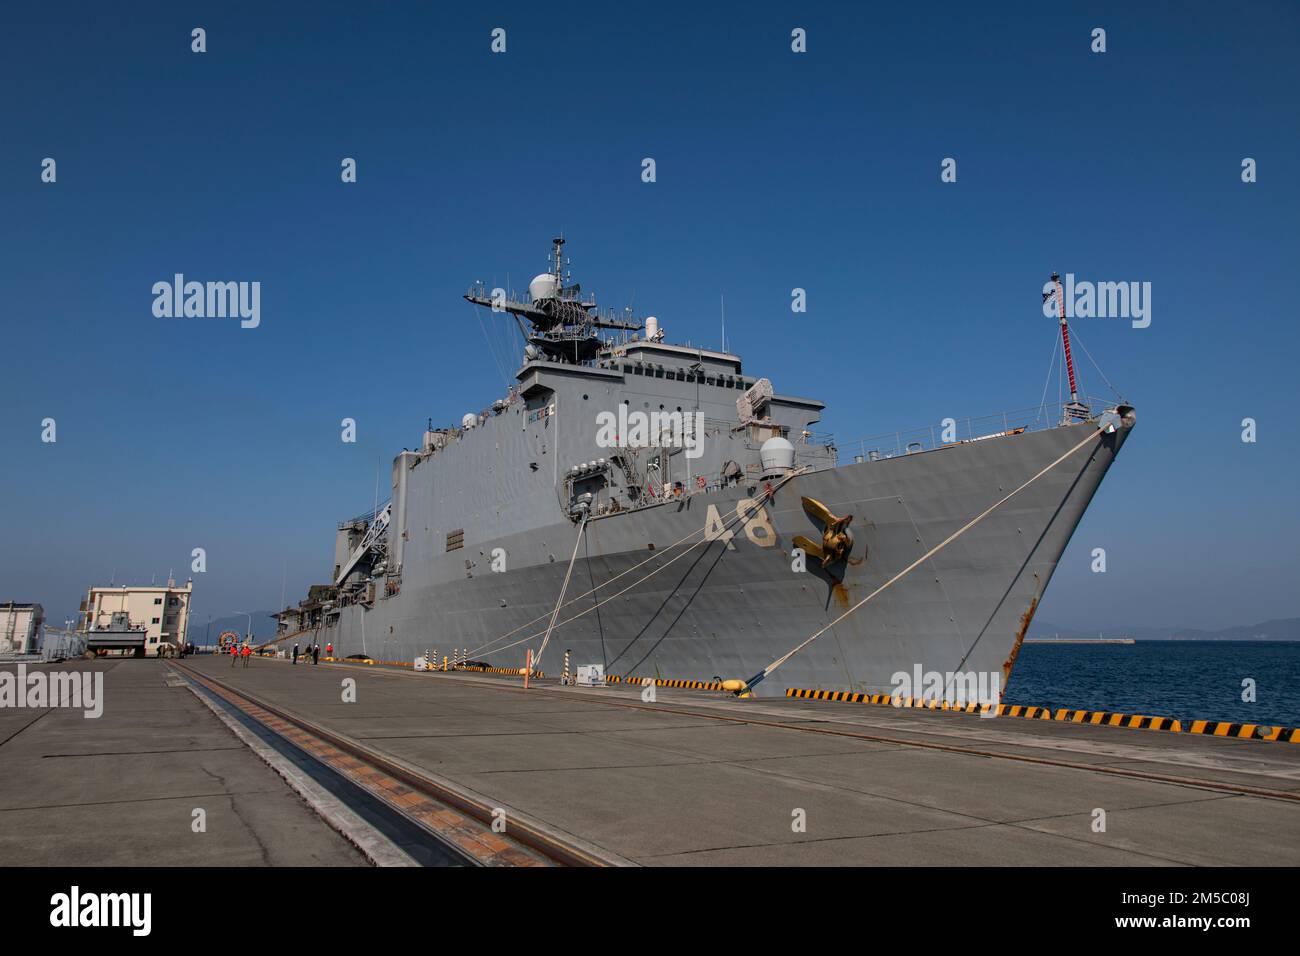 The amphibious dock landing ship USS Ashland (LSD 48) pulls into the harbor at Marine Corps Air Station Iwakuni, Japan, Feb. 25, 2022. The Ashland, part of the U.S. Expeditionary Strike Group, with the 31st MEU embarked, is homeported in Sasebo, Japan, and visited MCAS Iwakuni to conduct logistical onload and offload in support of MEU operations. With a collocated airfield and harbor, MCAS Iwakuni is uniquely postured to provide advanced naval support to maintain regional security, peace, and stability. Stock Photo